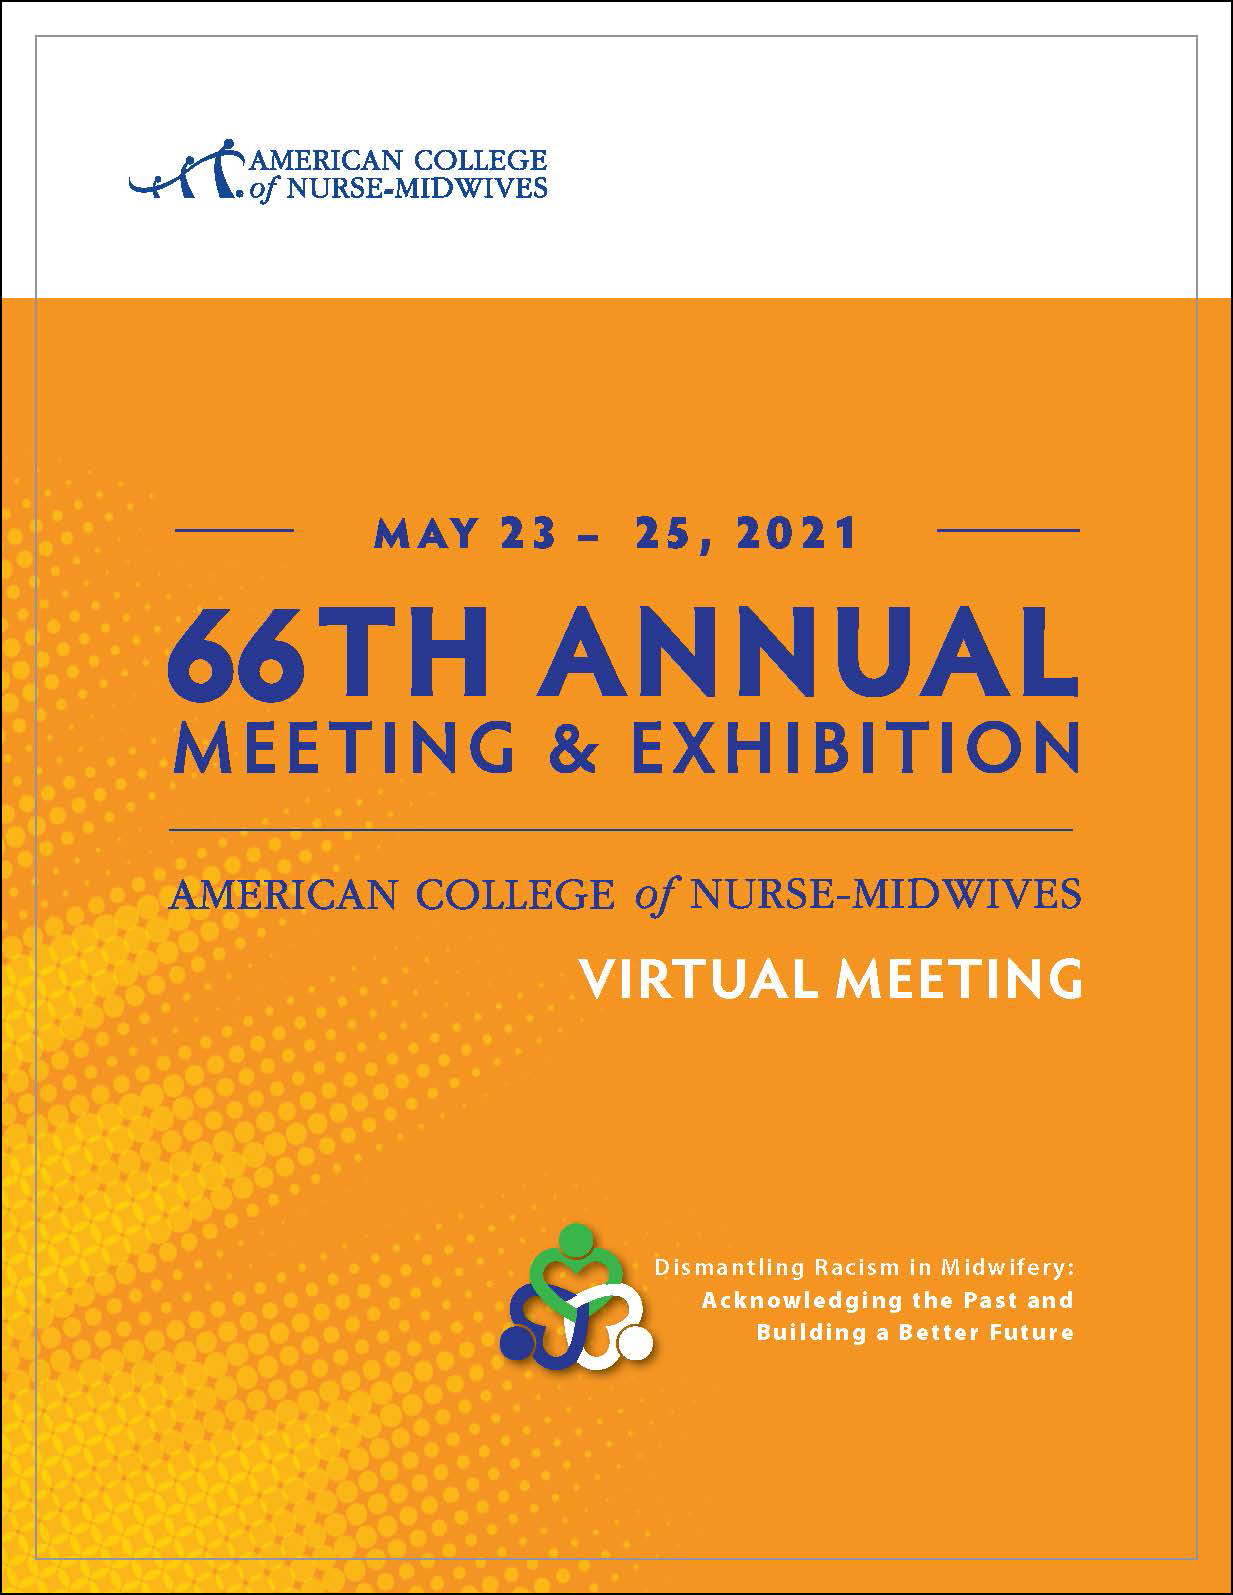 Past ACNM Meetings and Events Past ACNM Meetings and Events